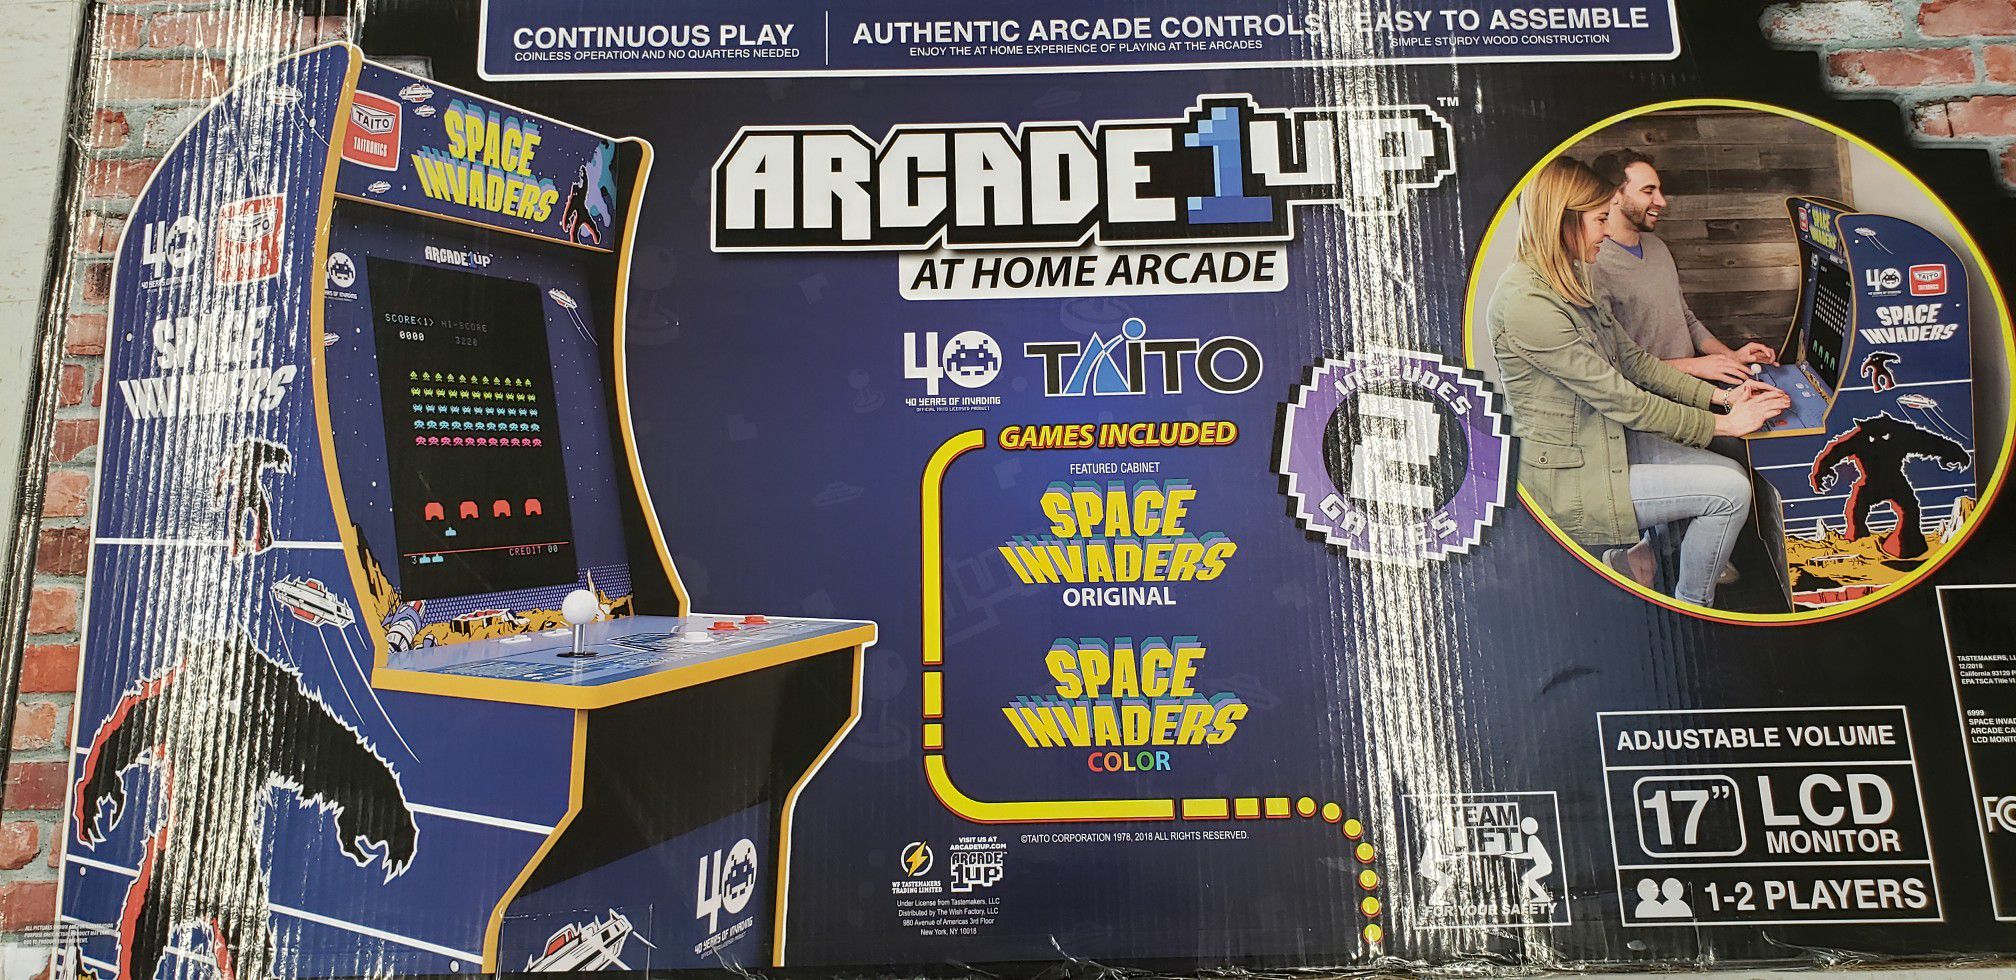 Space invaders arcade game new